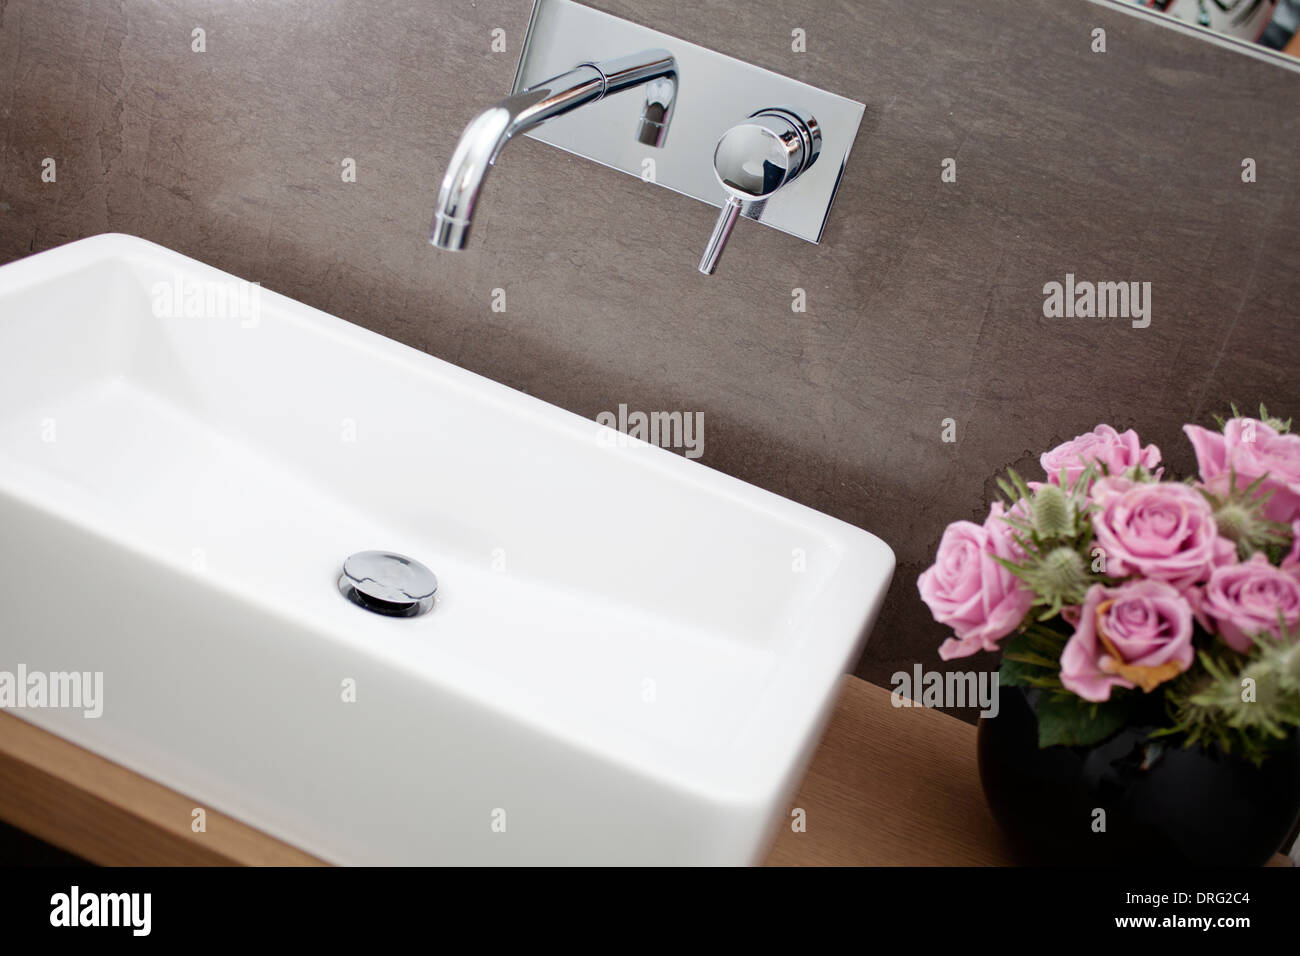 Bathroom with square washbasin and chromed tap. Roses on the side Stock Photo